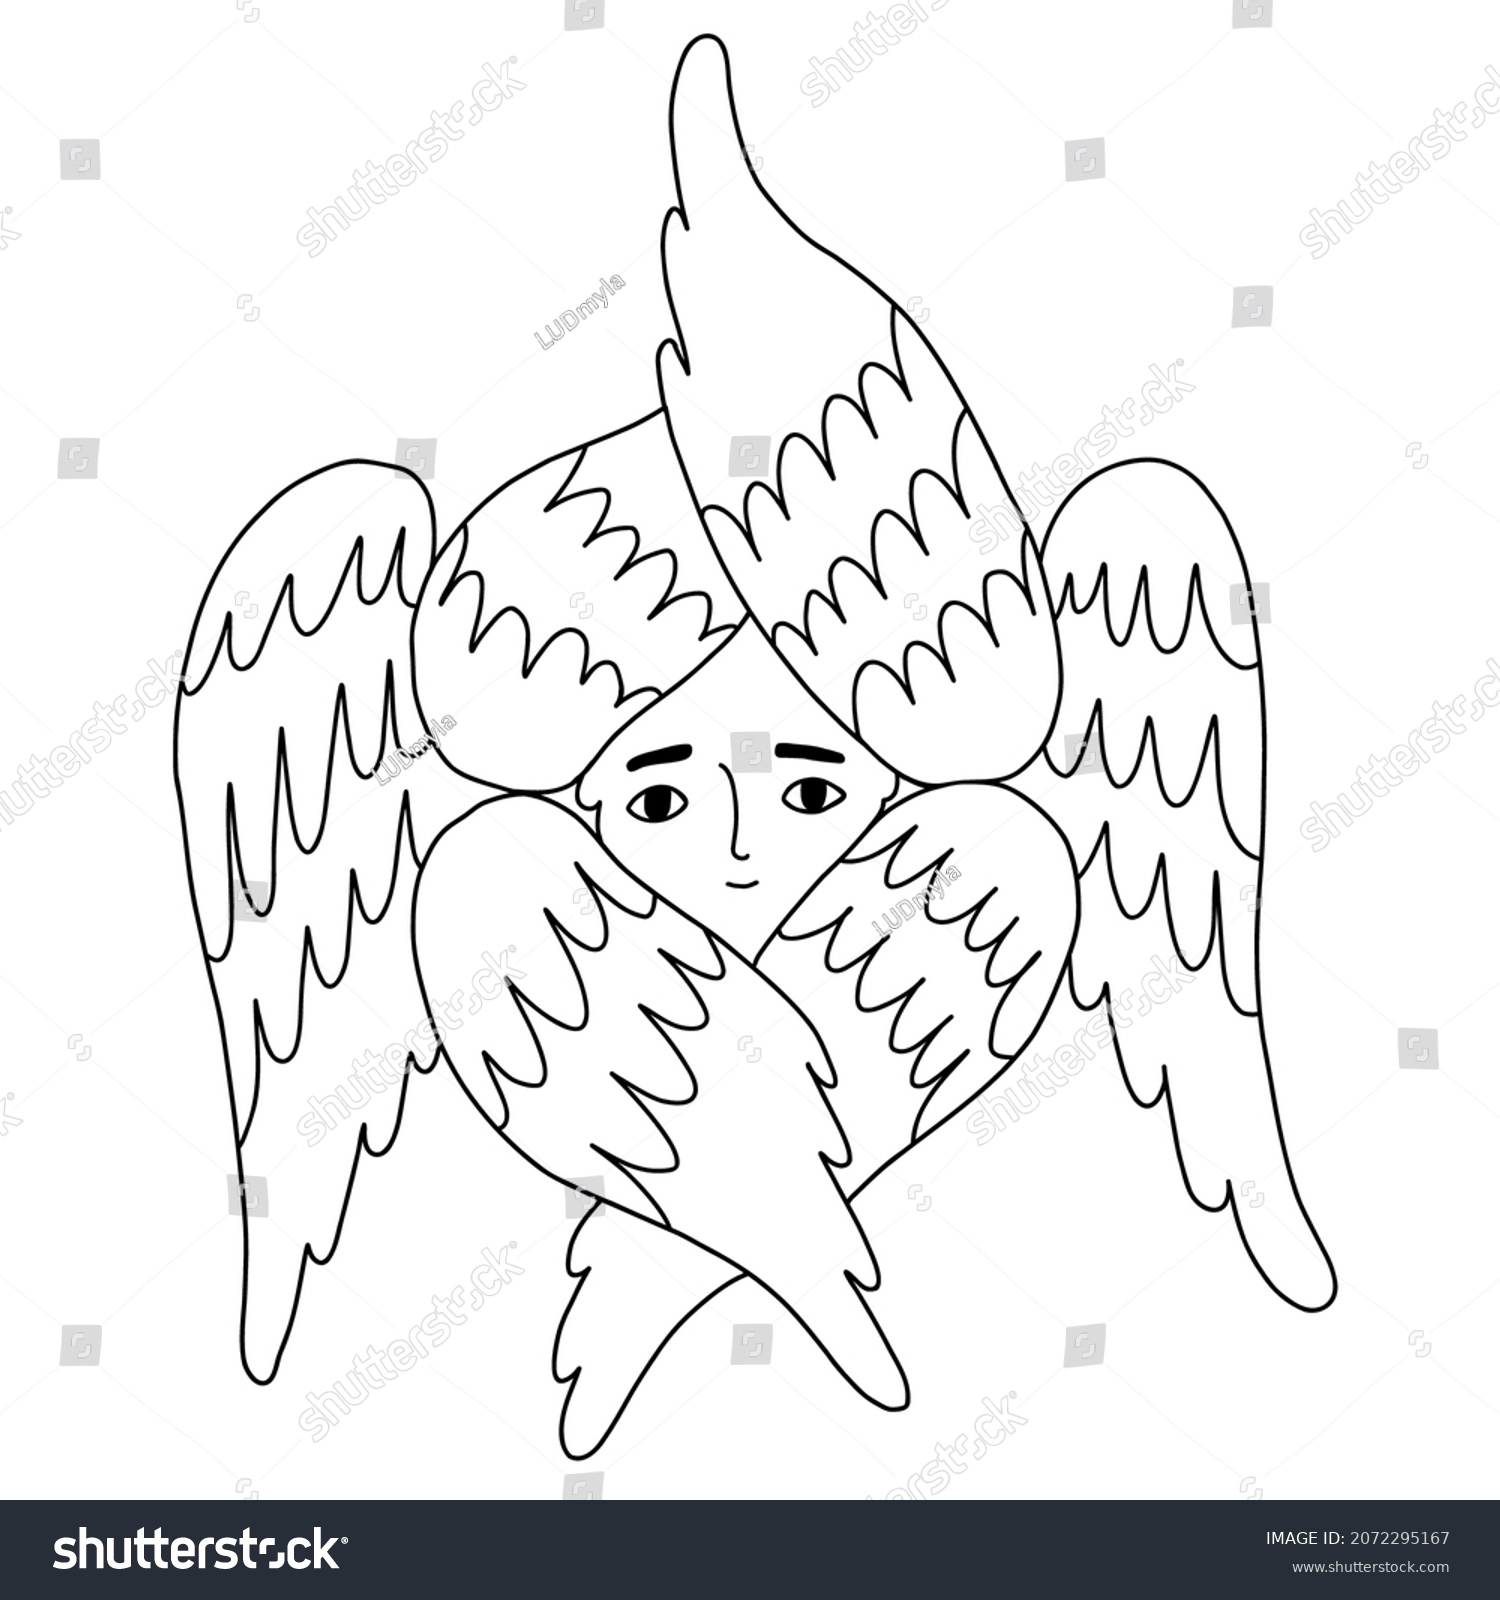 SVG of Religious outline symbol six winged Angel cherub and Seraph. Vector illustration. Line drawing. heavenly character For design and decoration of religious concepts svg